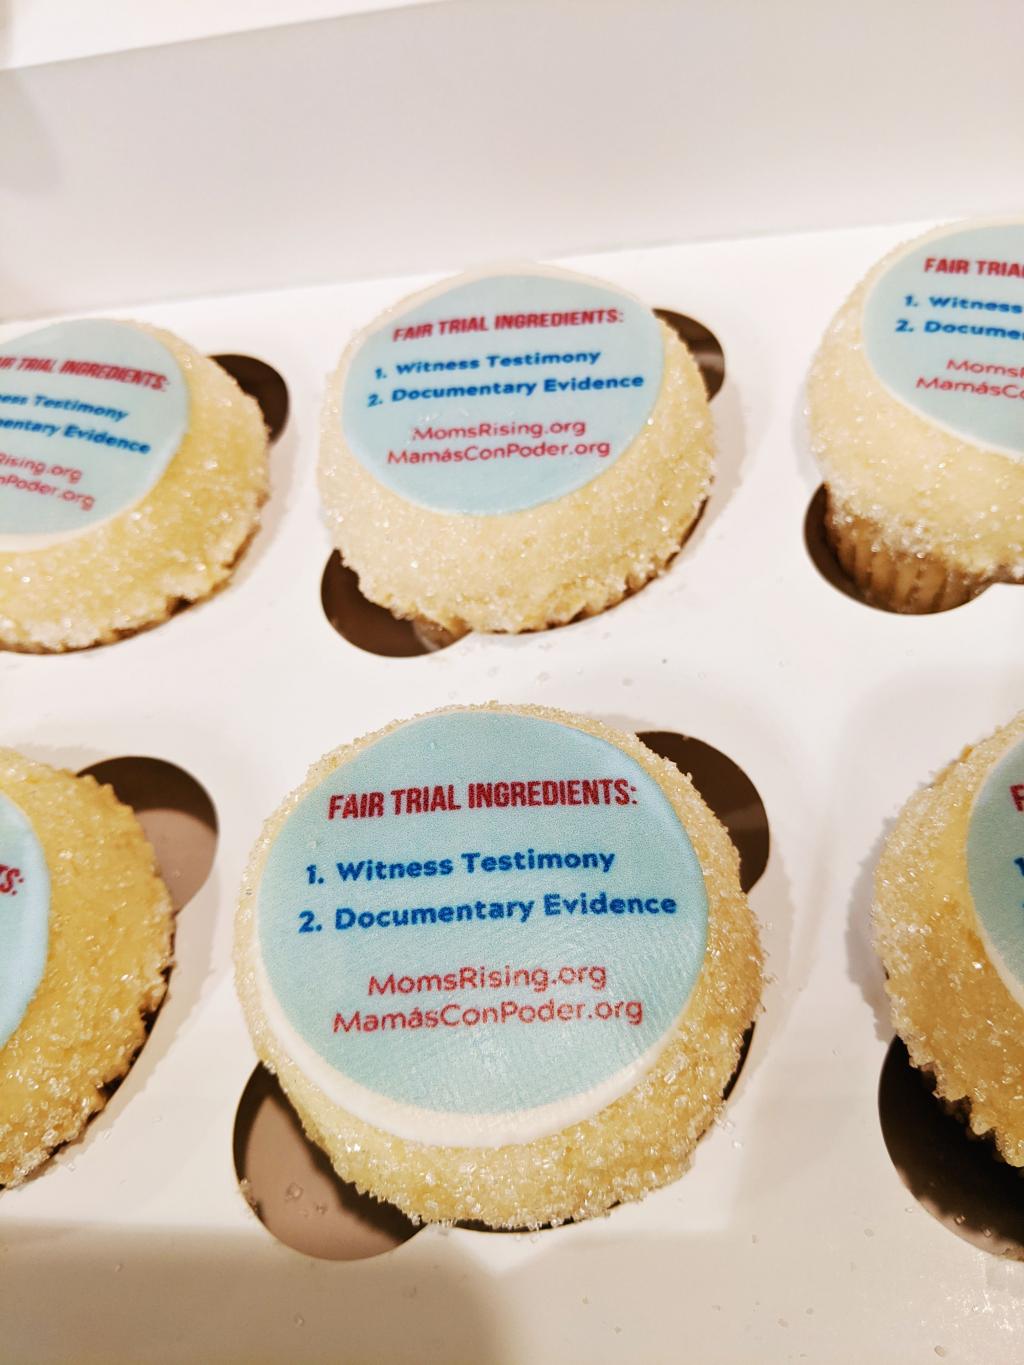 [IMAGE DESCRIPTION: A photo of cupcakes with an impeachment message in the frosting.]